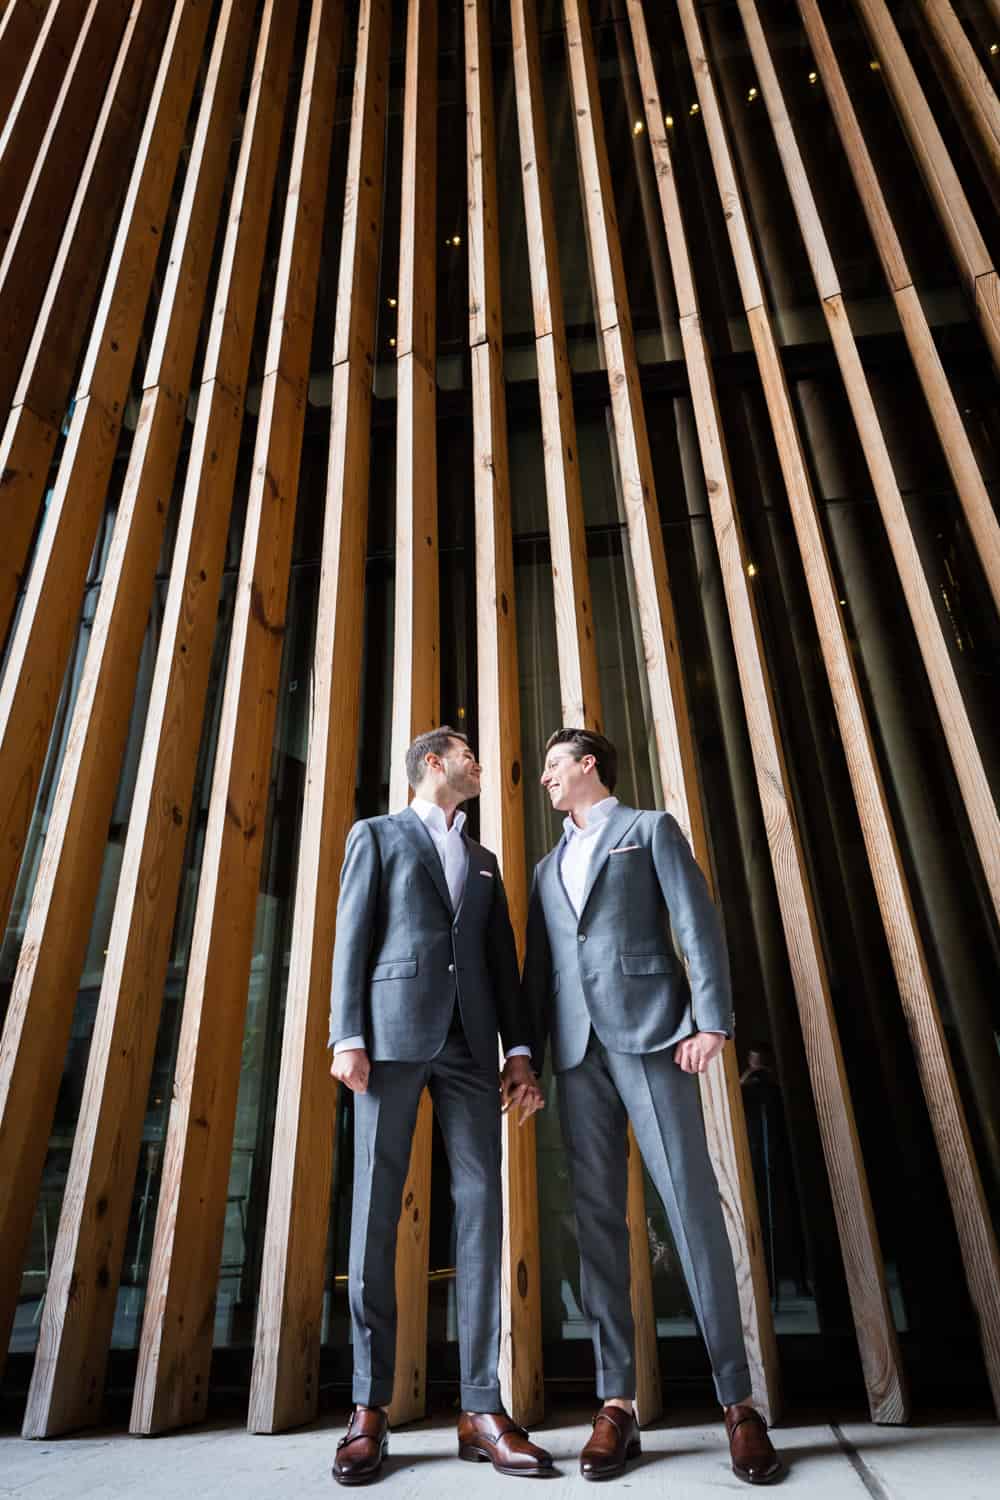 Greenpoint Loft wedding photos of two grooms standing in front of wall with wooden slats